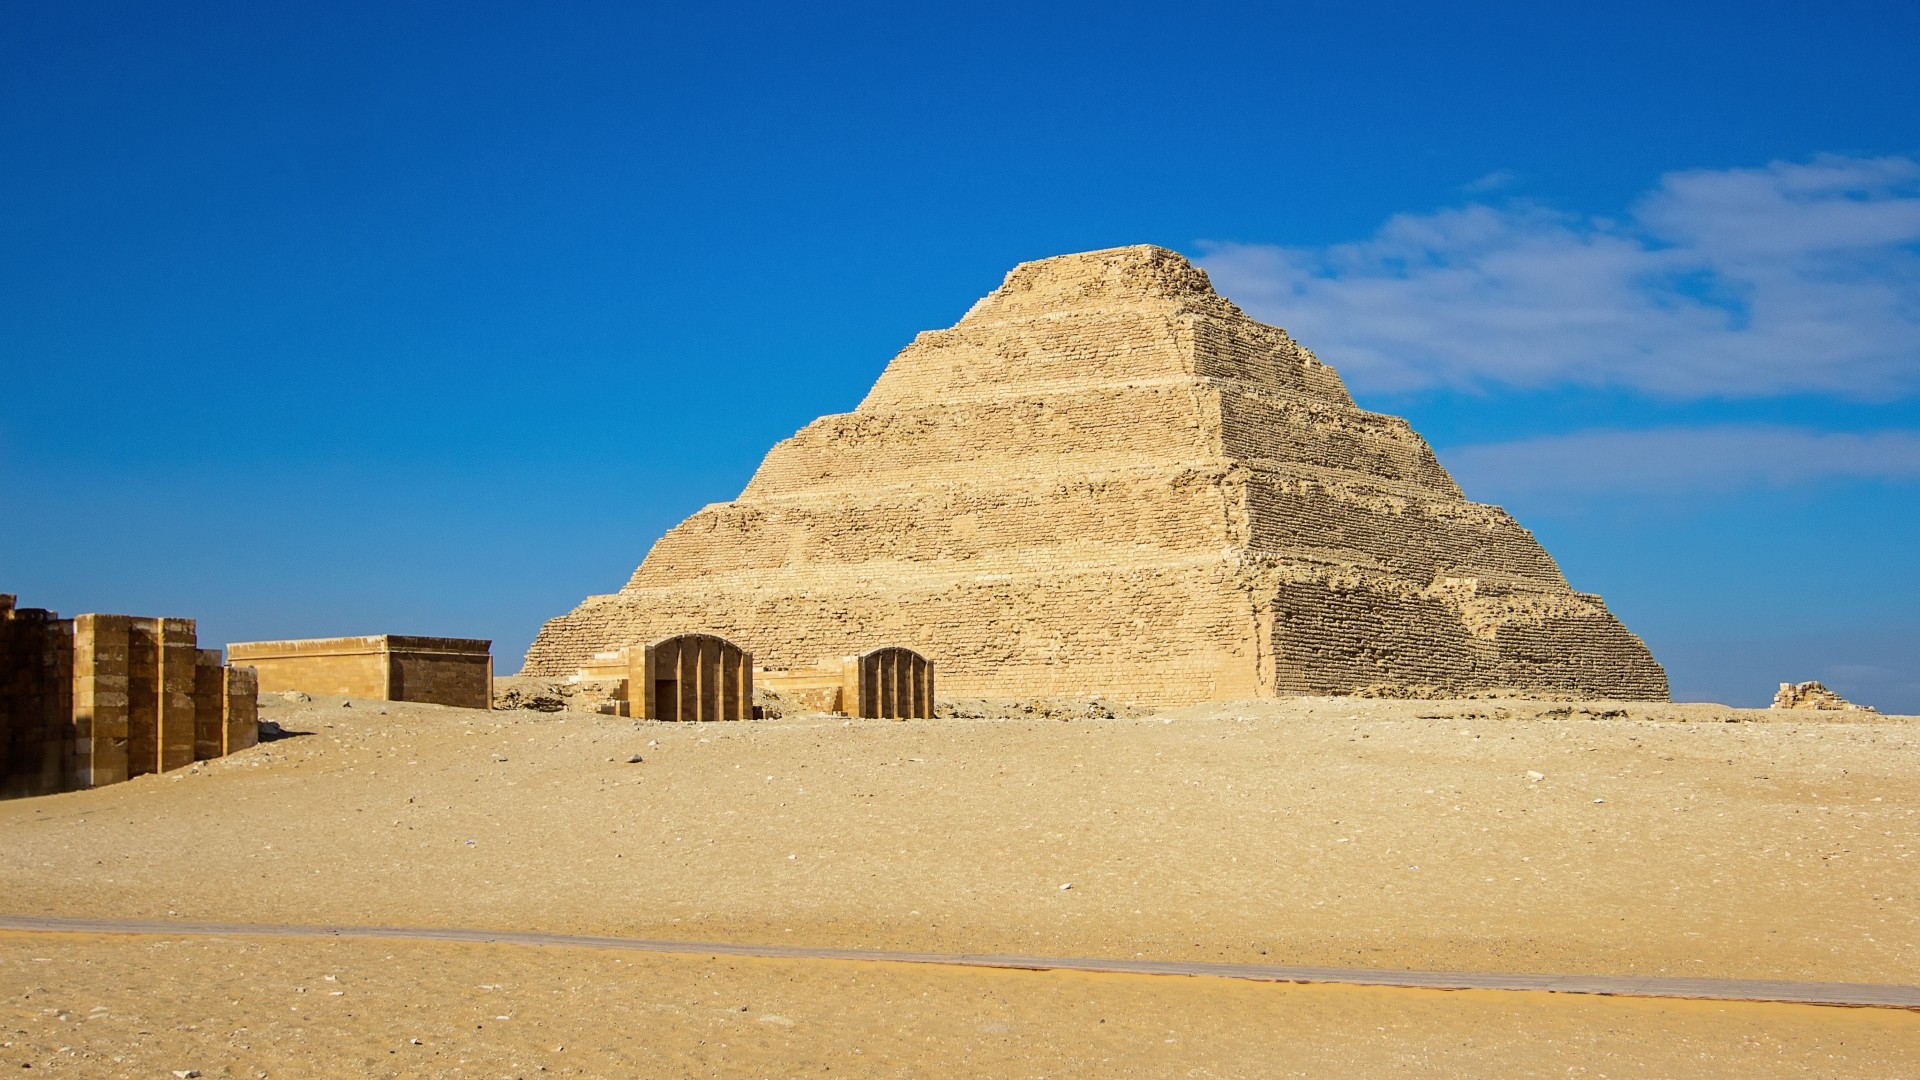 The step pyramid of Djoser is archaeological and historical site in Saqqara necropolis, south of Cairo.